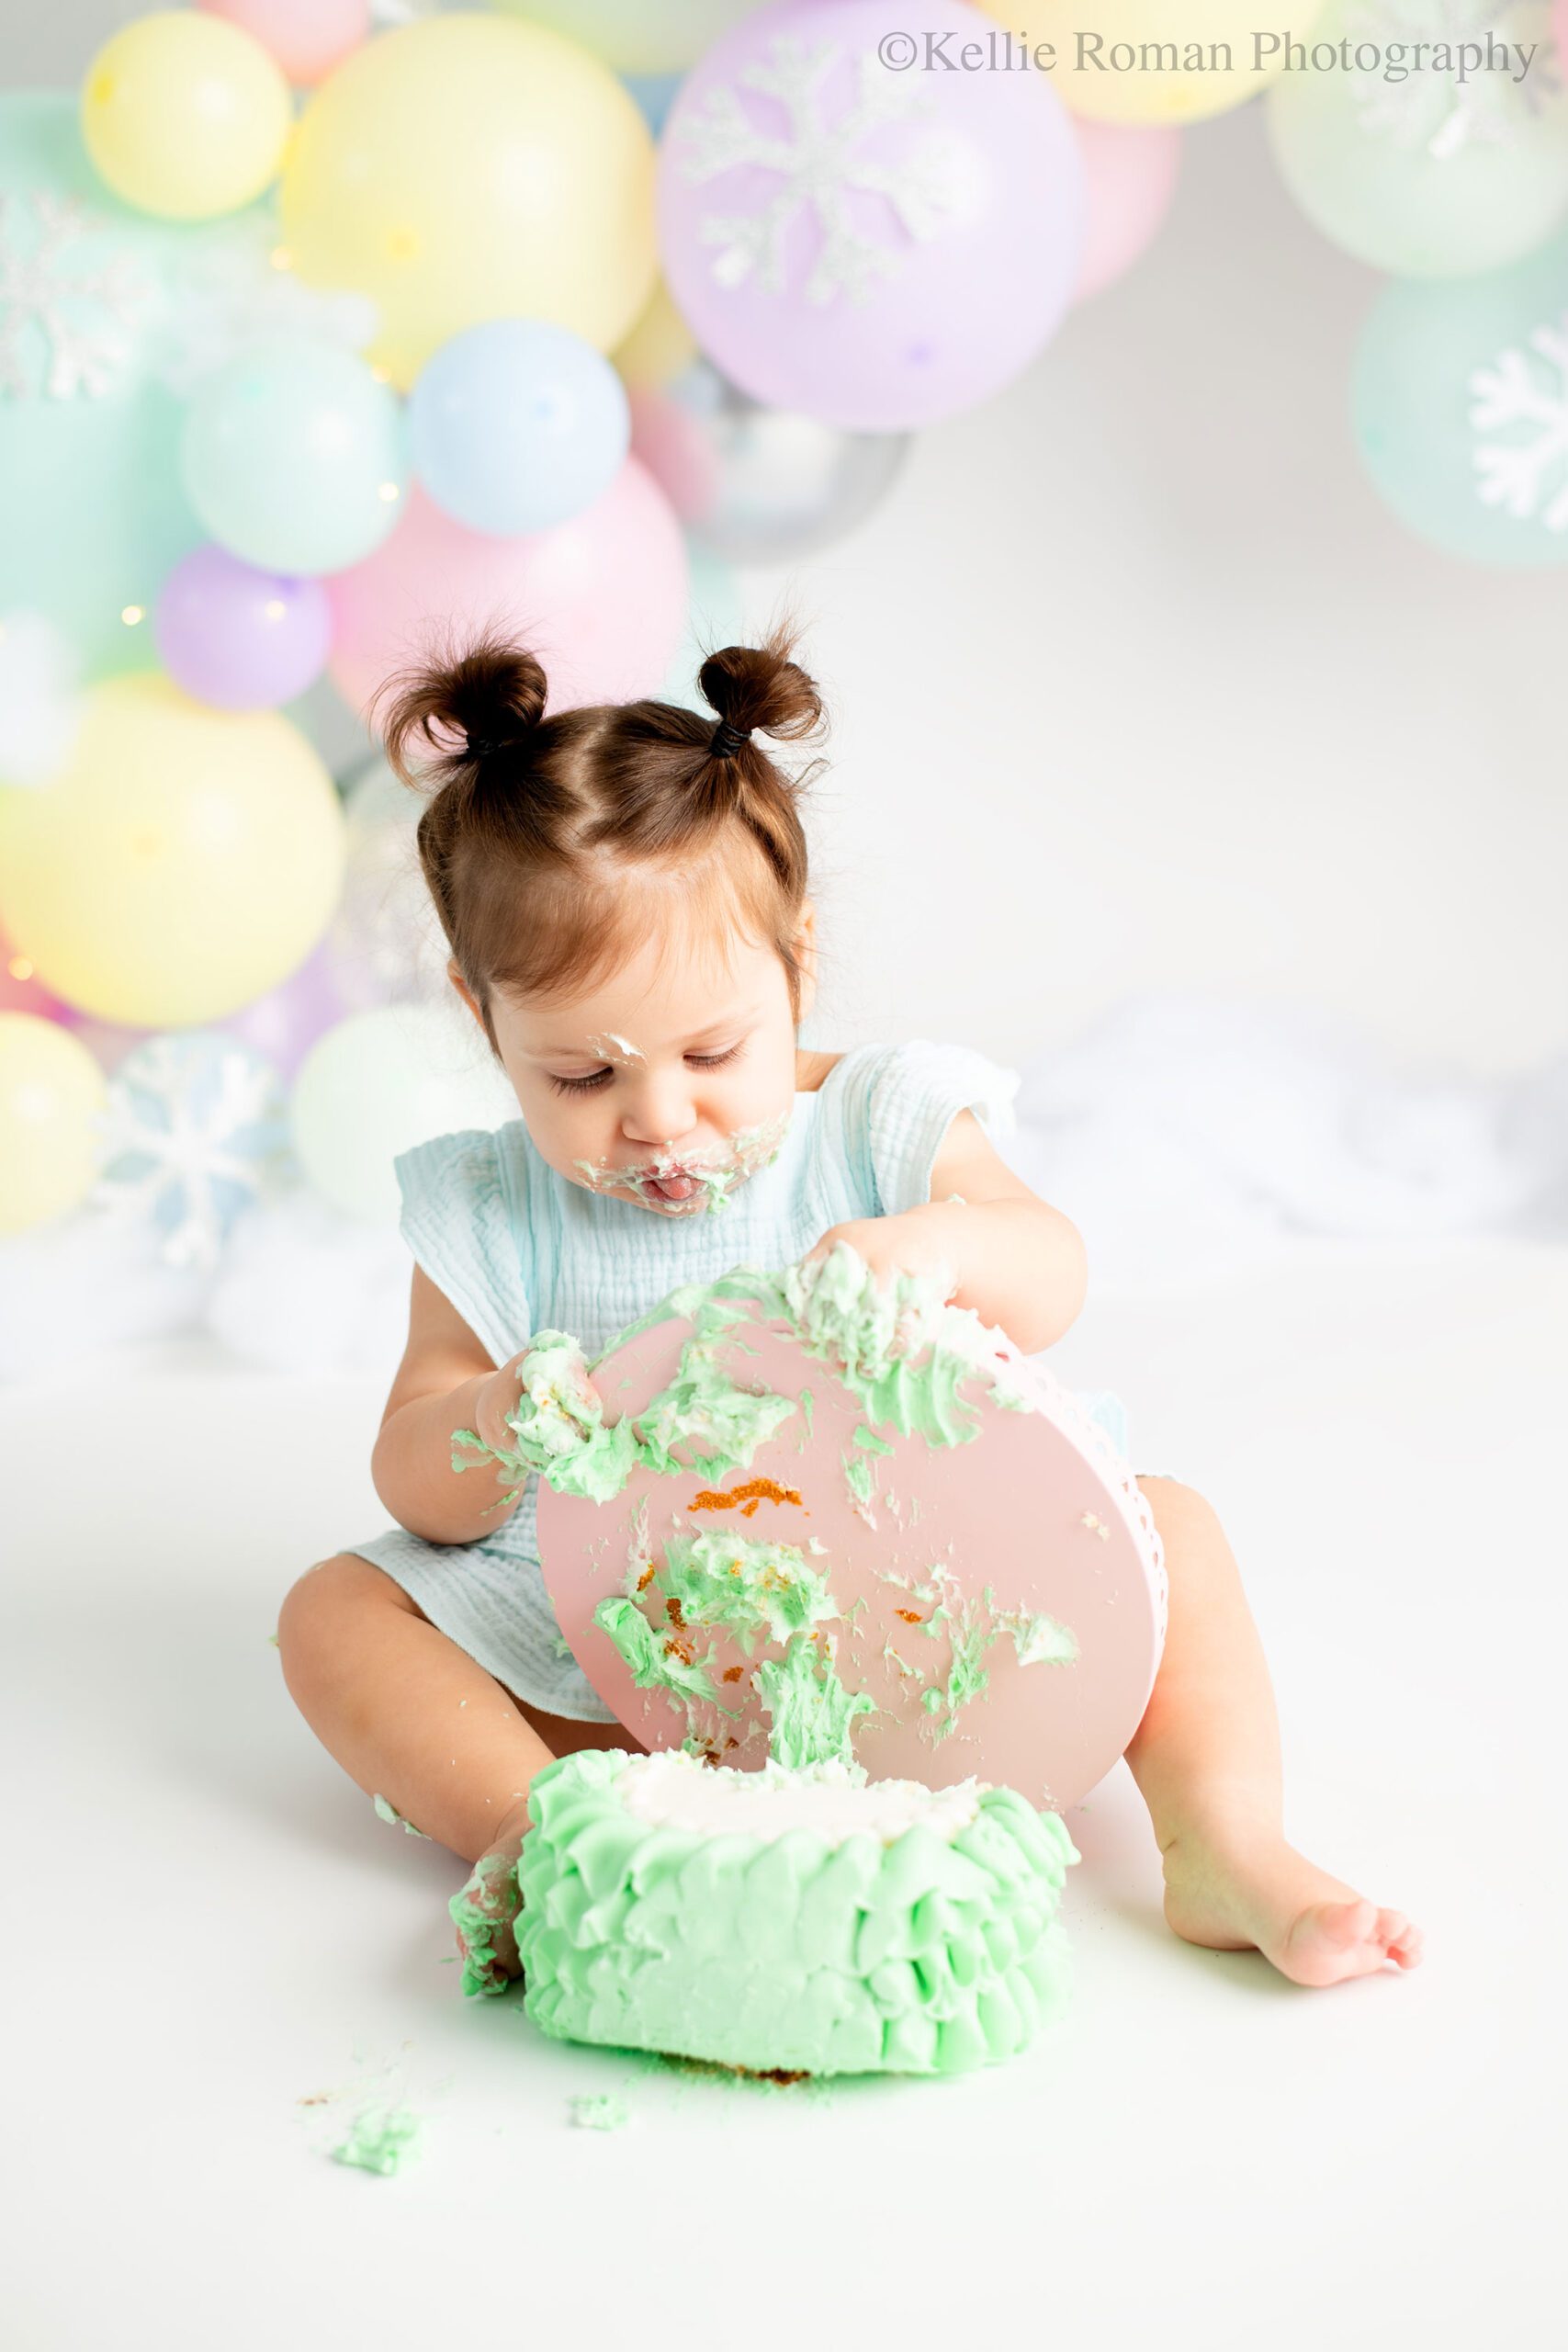 milwaukee pastel cake smash. one year old girl covered in frosting is tipping green cake off a pink cake stand. she has a light blue romper on and pigtails. the background is a custom made pastel balloon garland. 